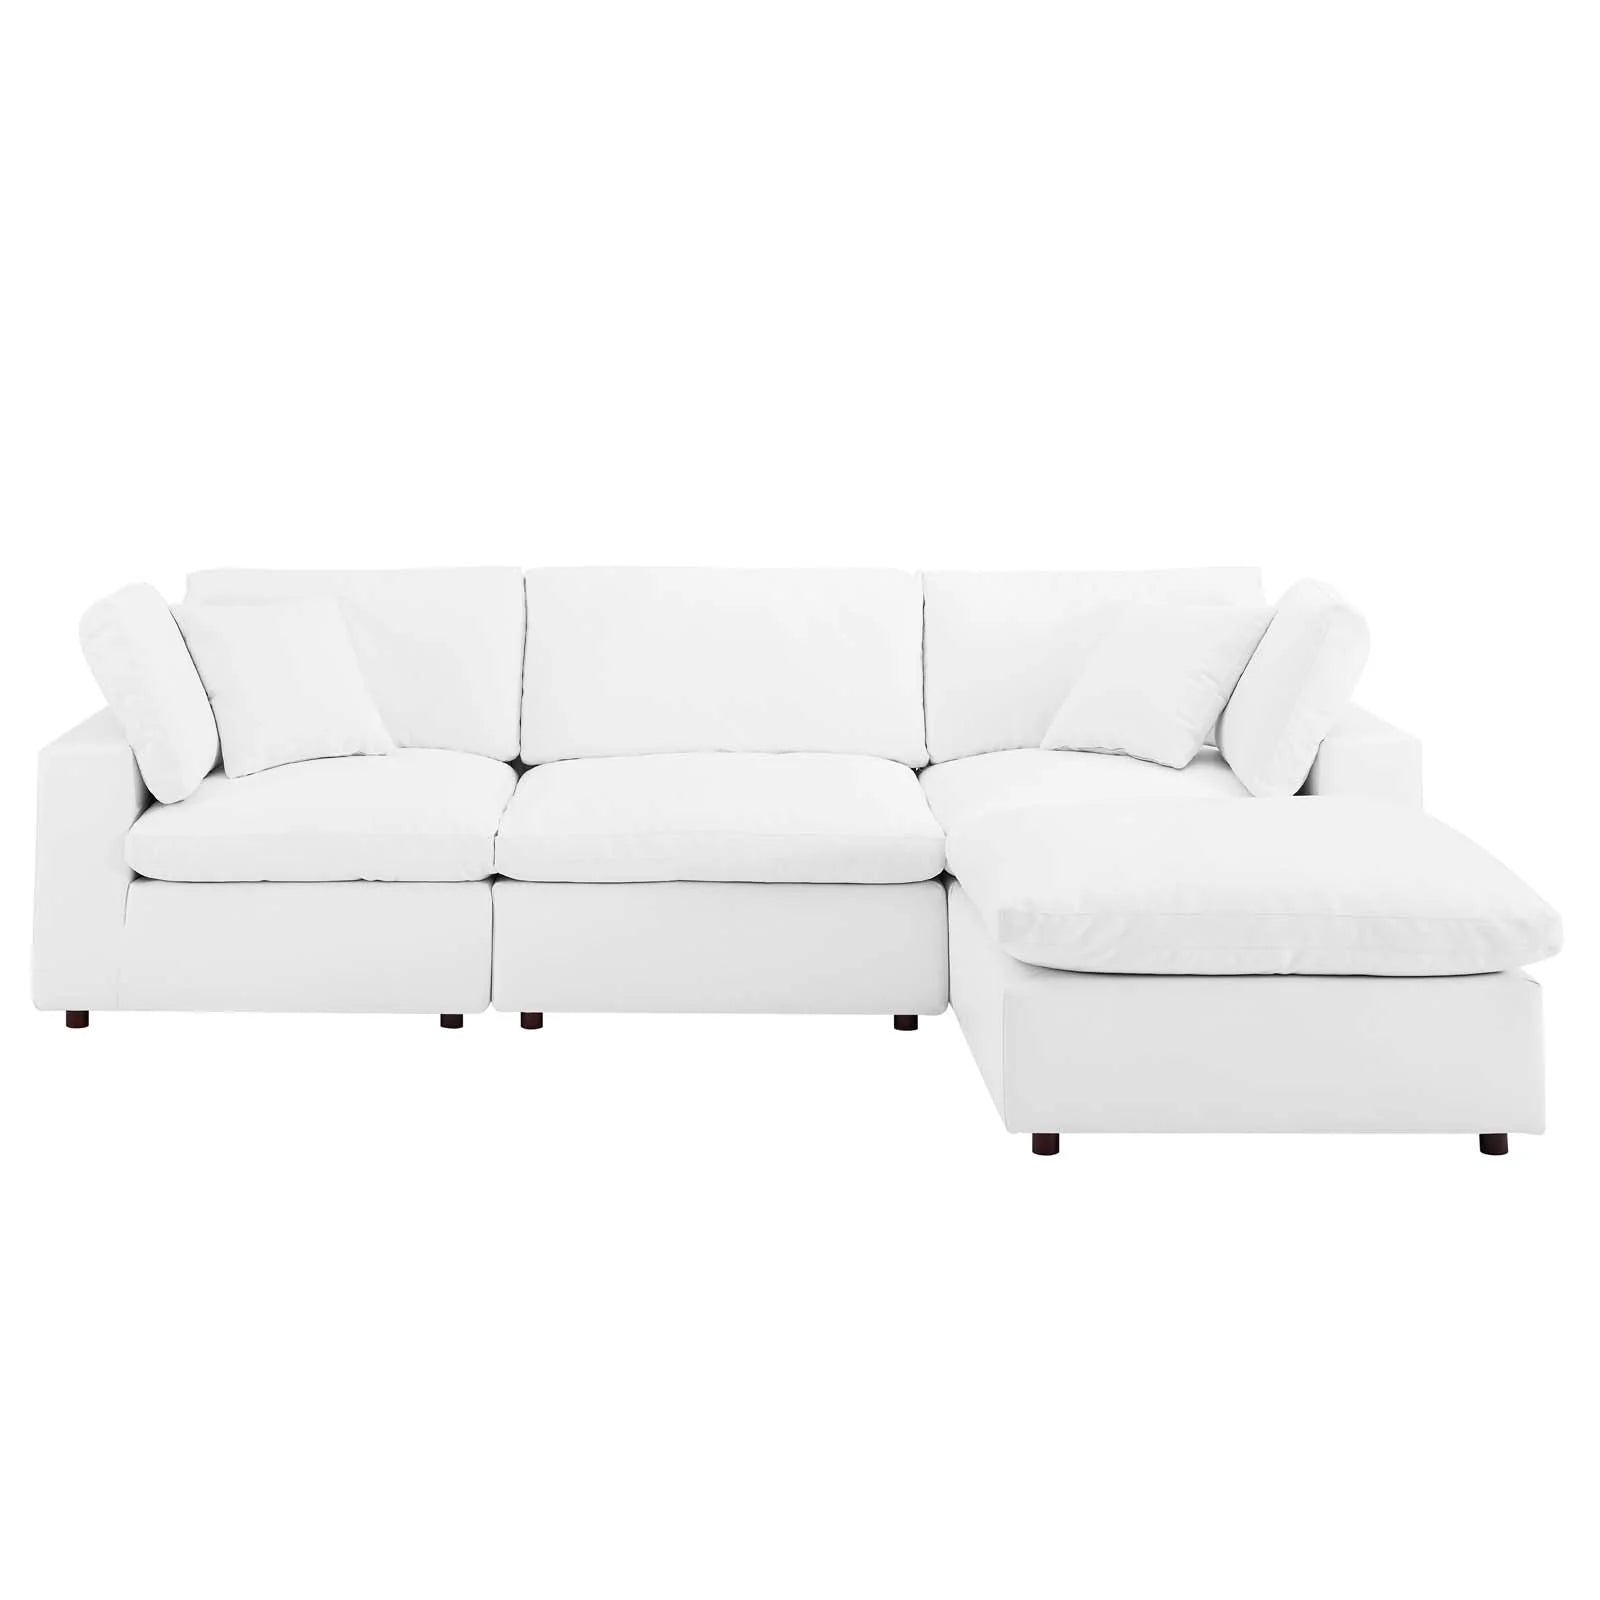 Commix Down Filled Overstuffed Vegan Leather 4-Piece Sectional Sofa - Elite Maison